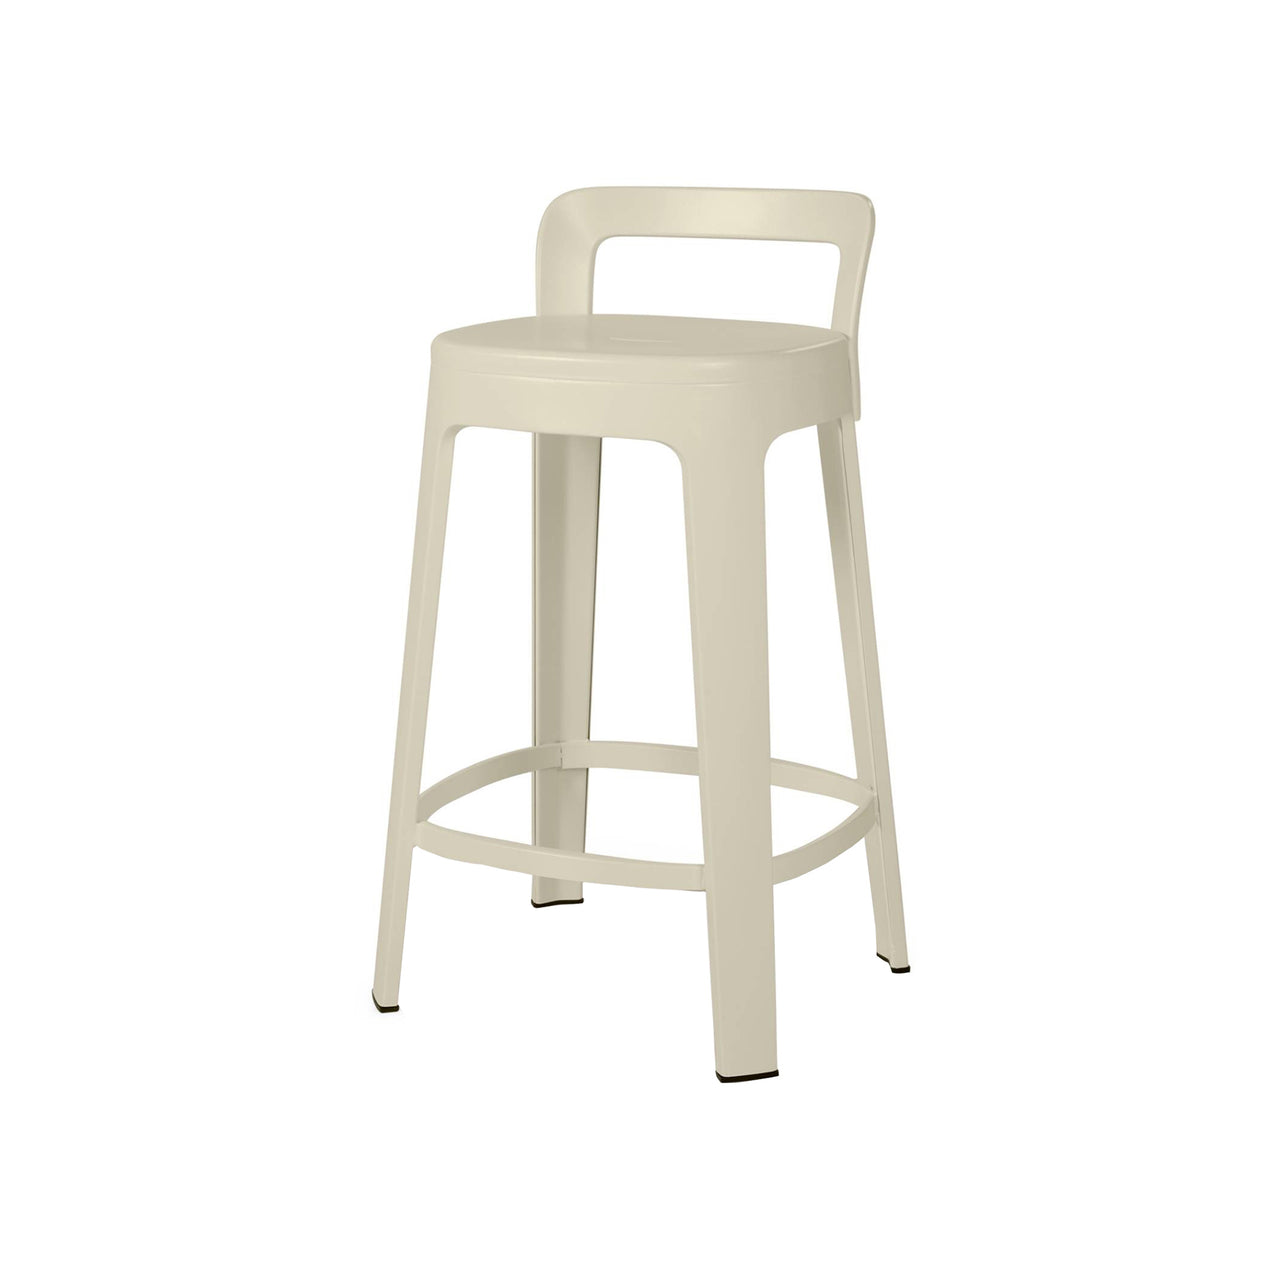 Ombra Bar + Counter Stool with Backrest: Counter + Grey